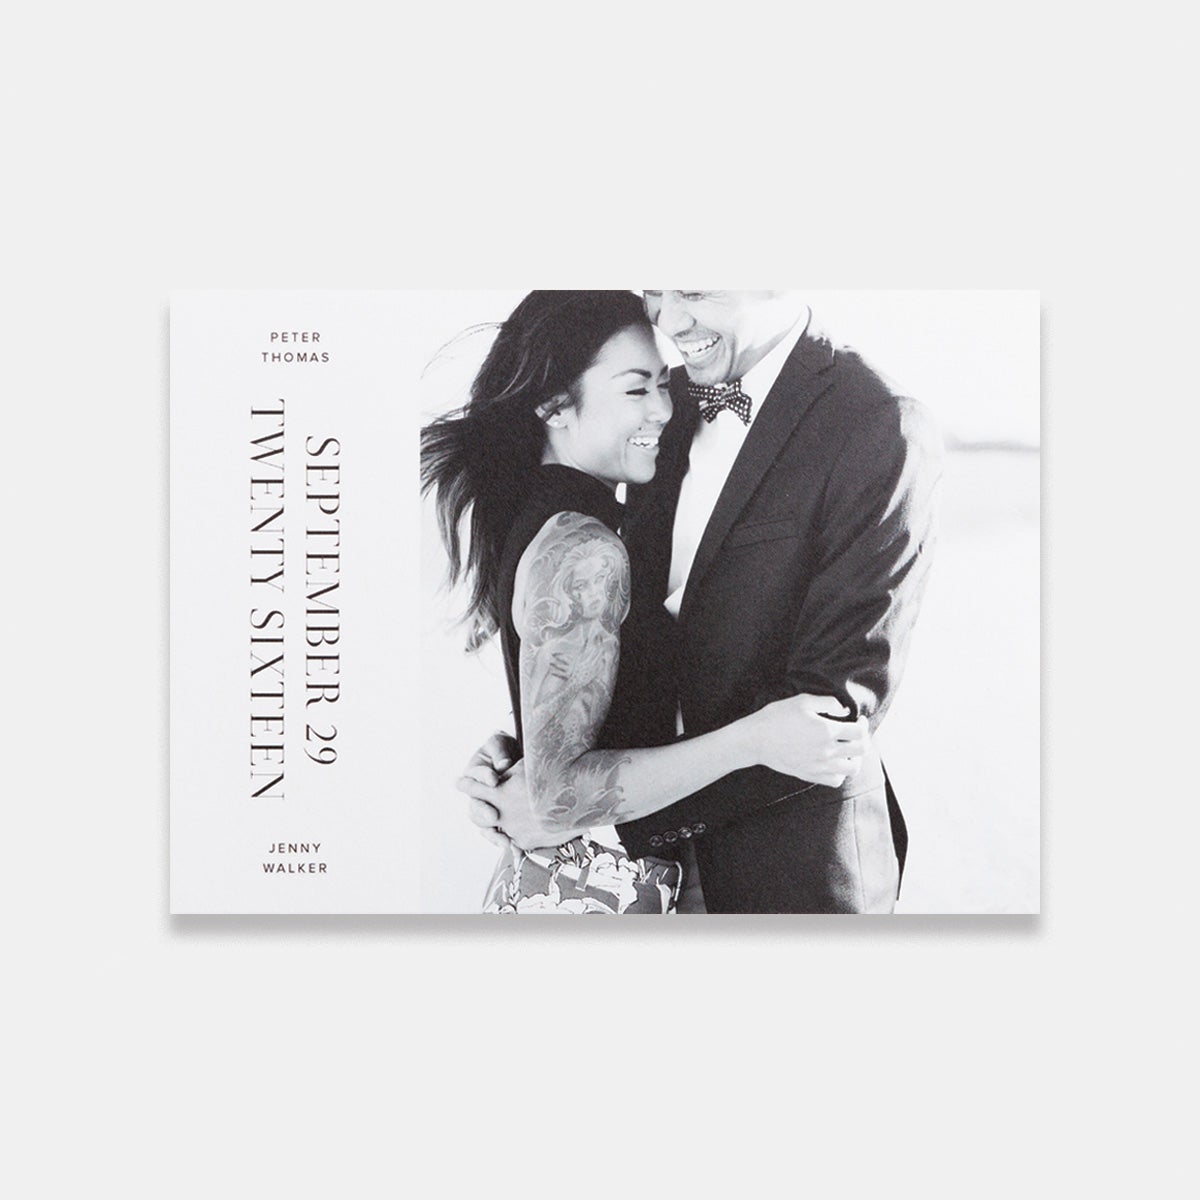 Photo Save The Date Card